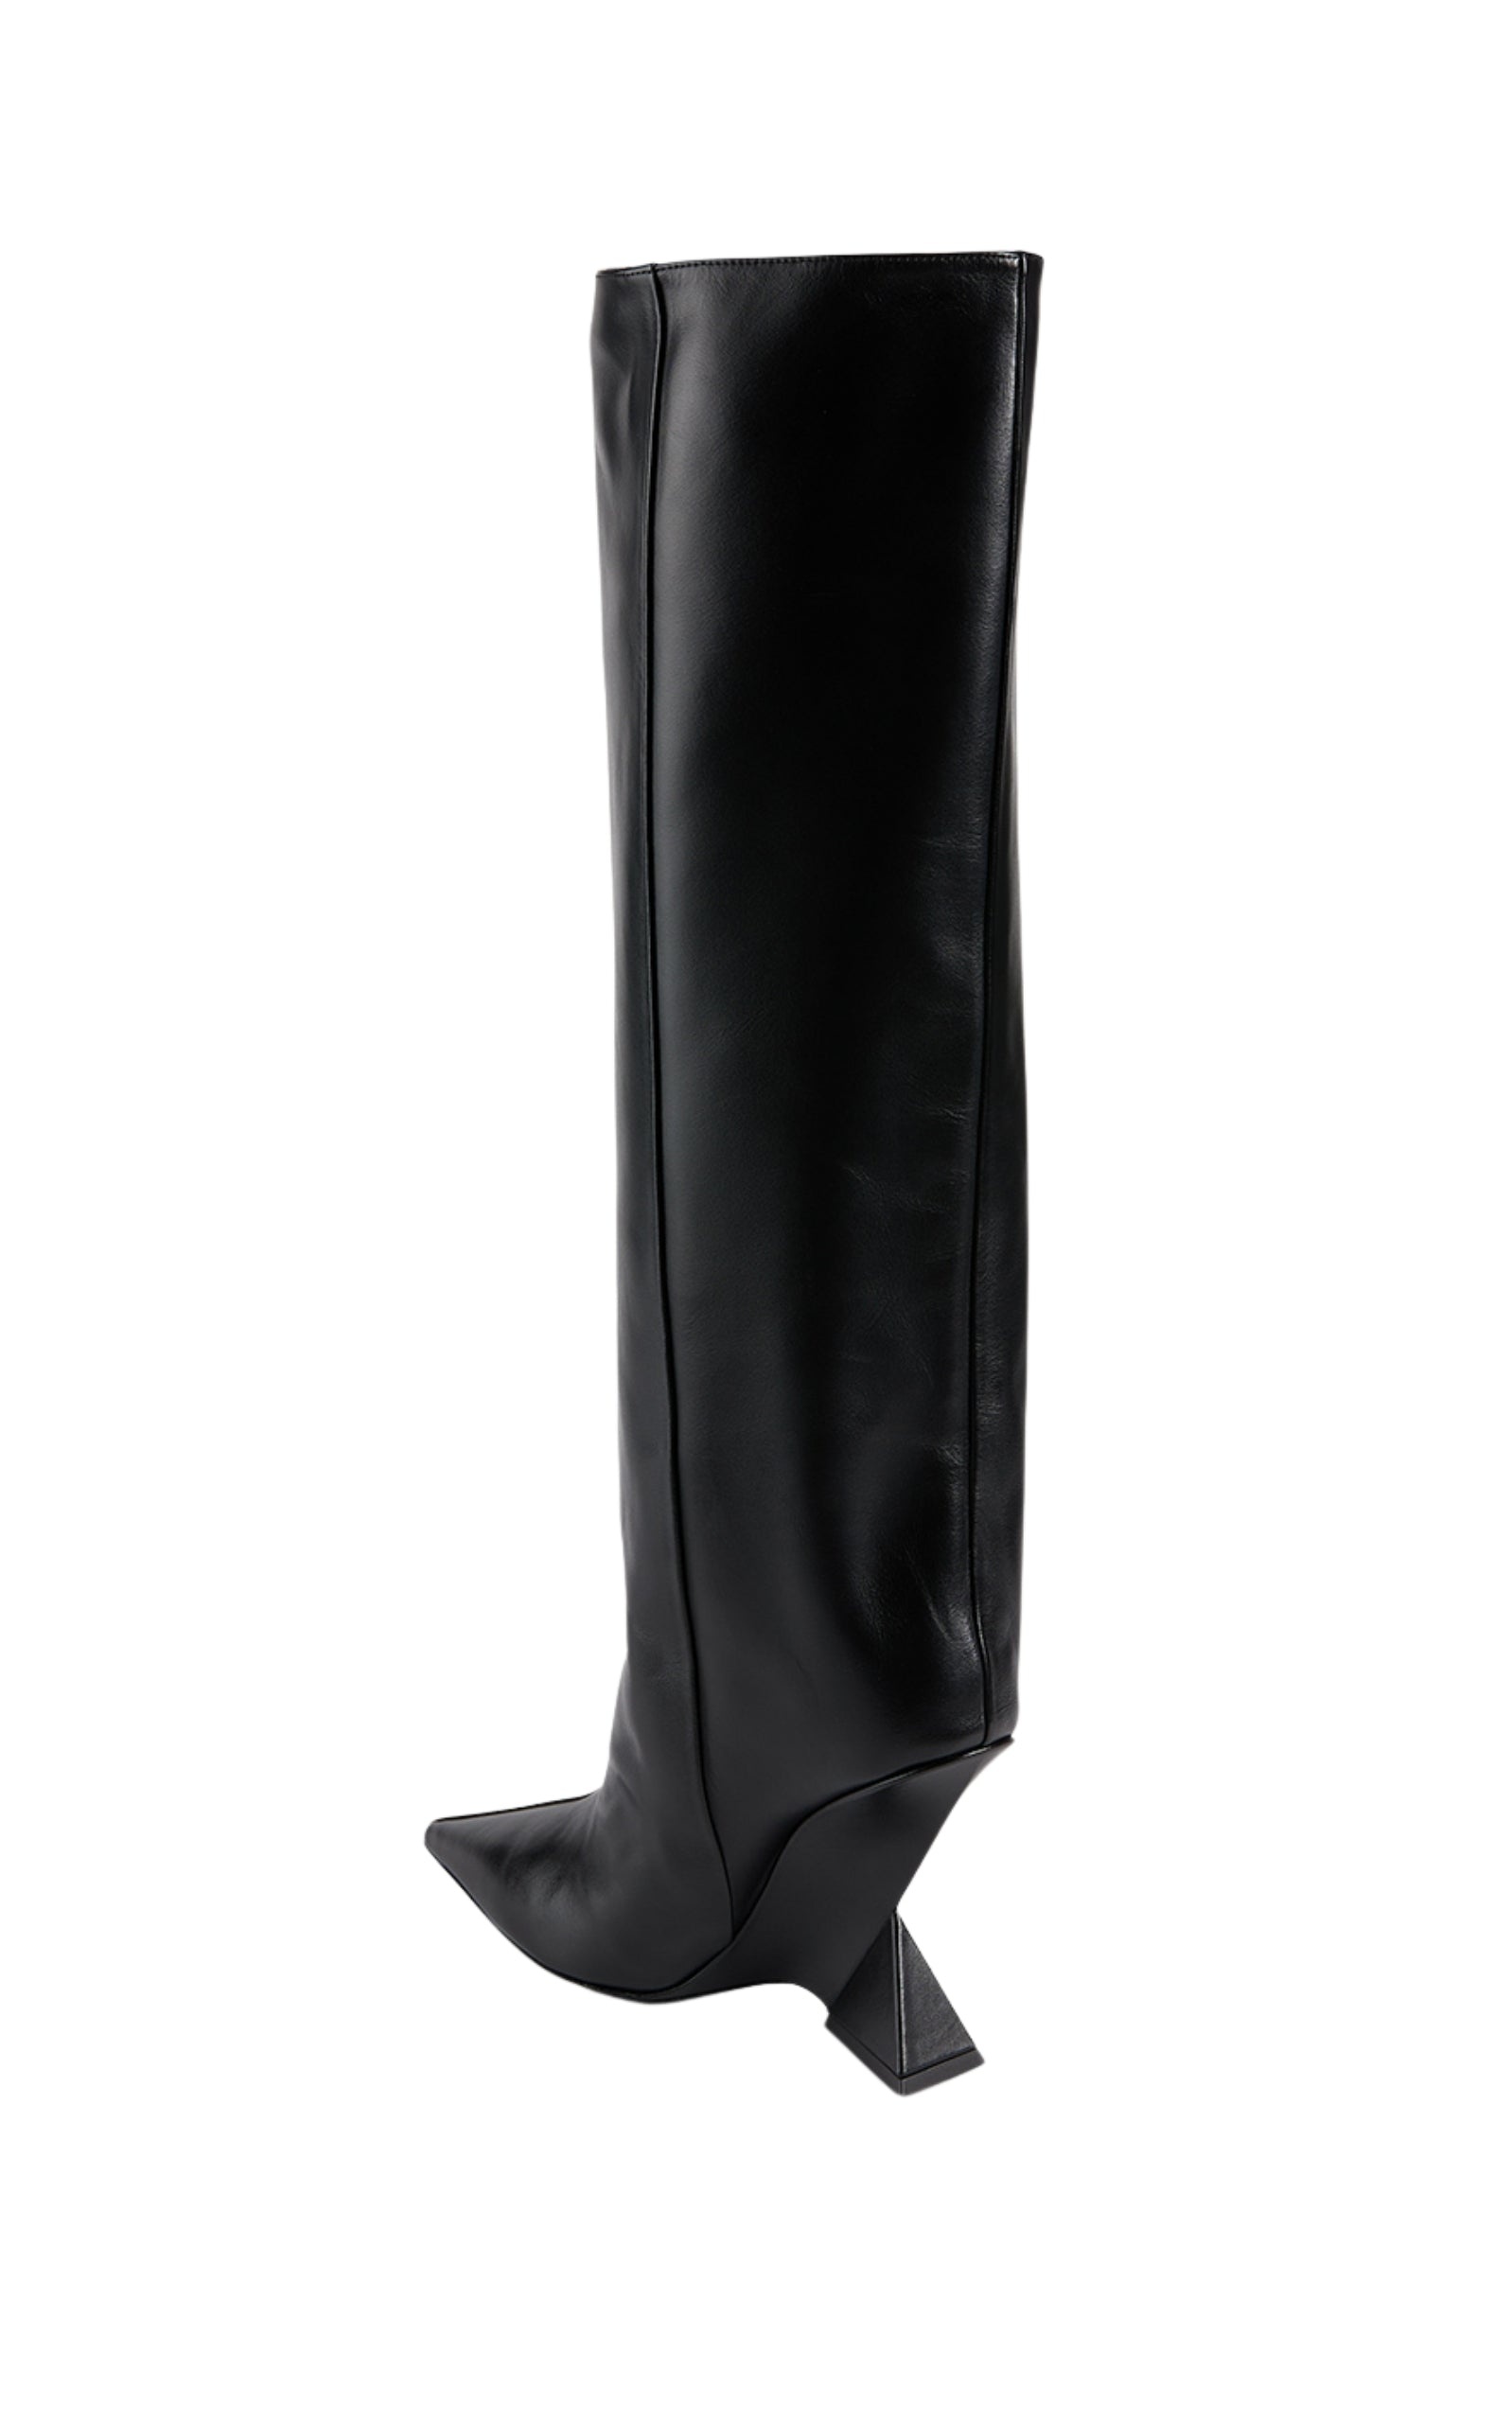 Cheope Leather Wedge Knee-High Boots - 5